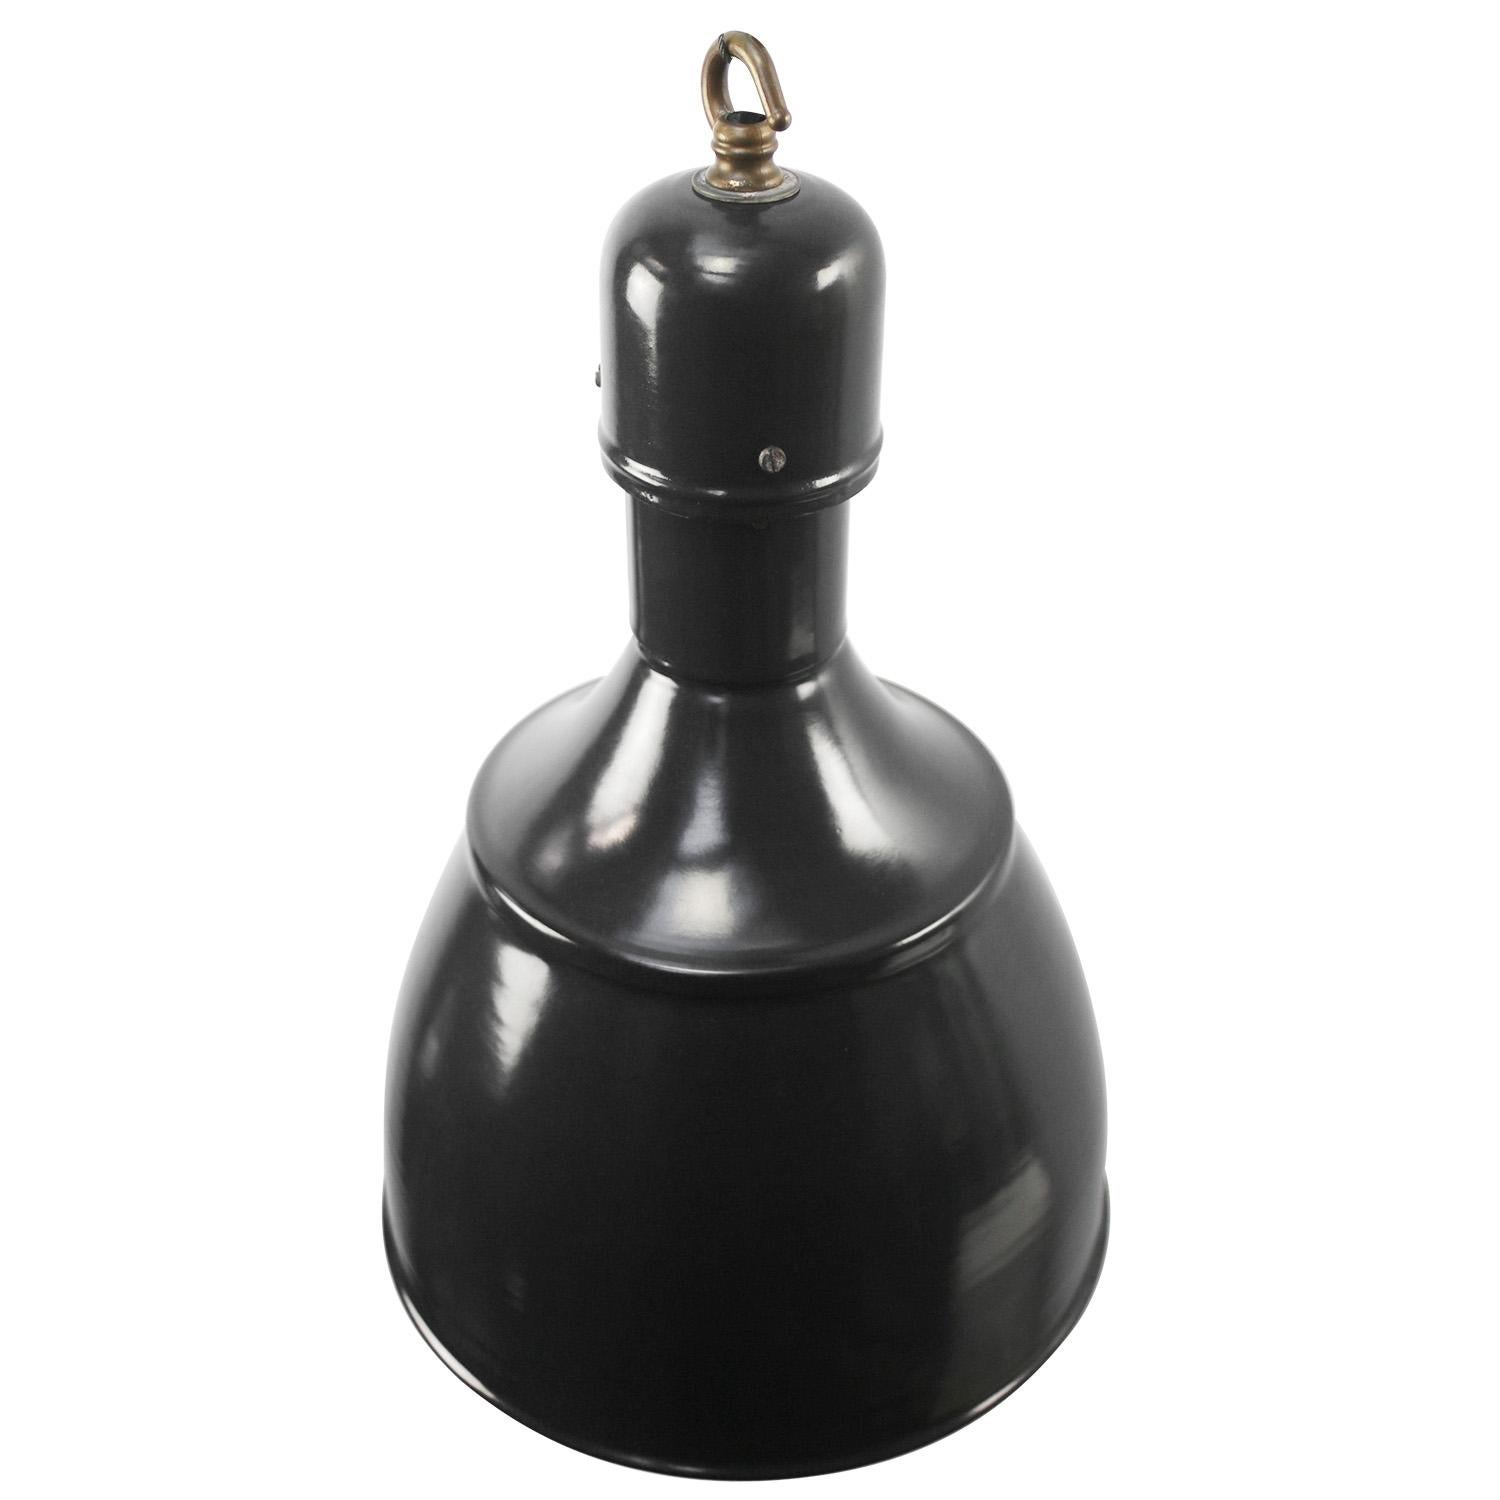 Black, very dark blue, enamel Factory pedant light
White interior, brass top. New old stock. 

Weight 2.3 kg or 5.1 lb.

Priced per individual item. All lamps have been made suitable by international standards for incandescent light bulbs,